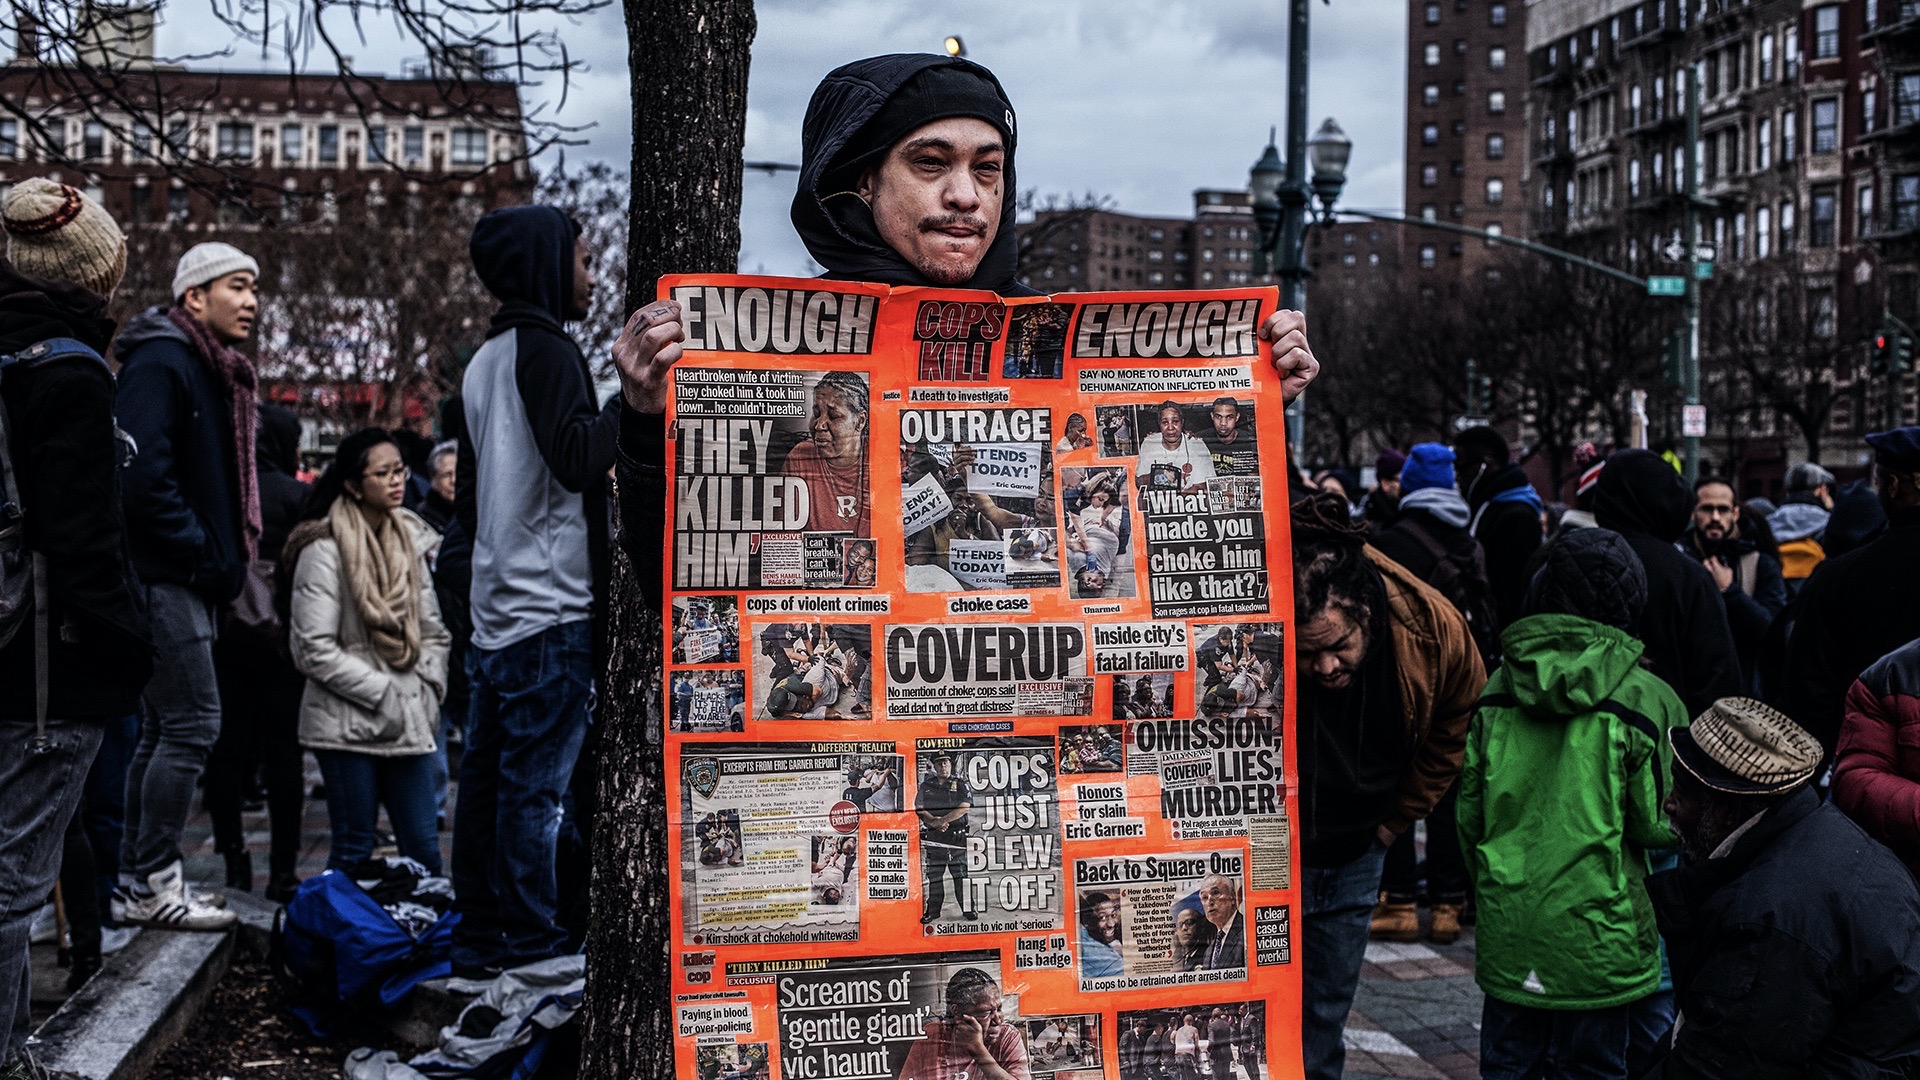 Incredible photos documenting the Black Lives Matter movement